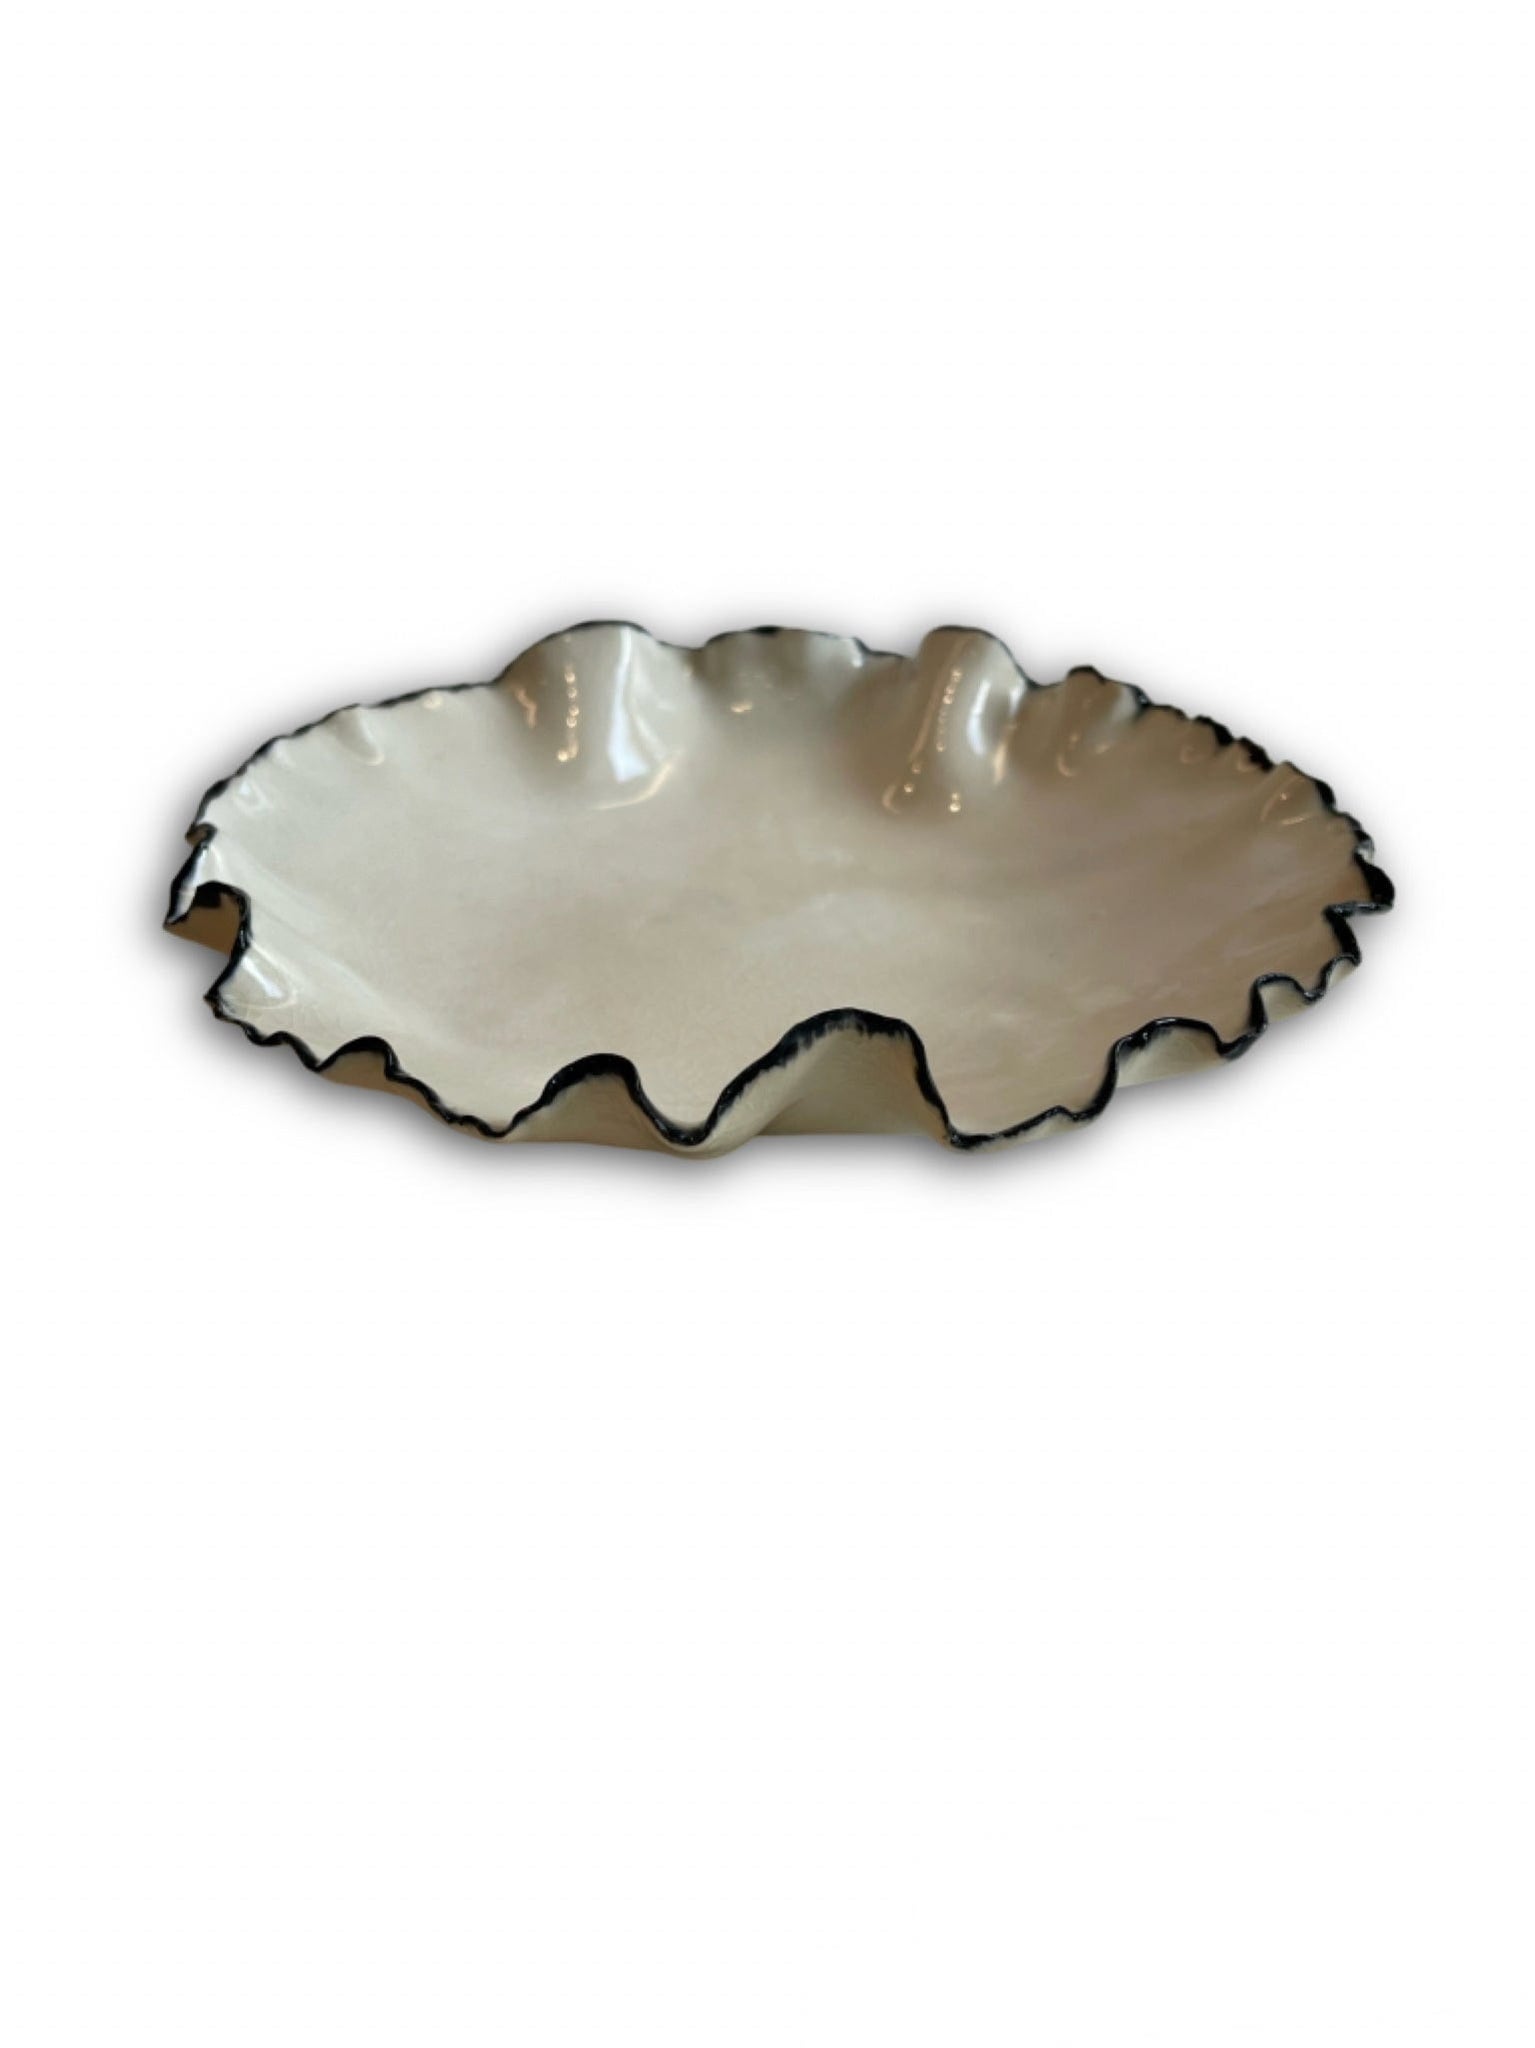 Nathalee Paolinelli Nathalee Paolinelli - Torn Ruffle Bowl in White with Black Rim La Bomba Floristry Vancouver Canada